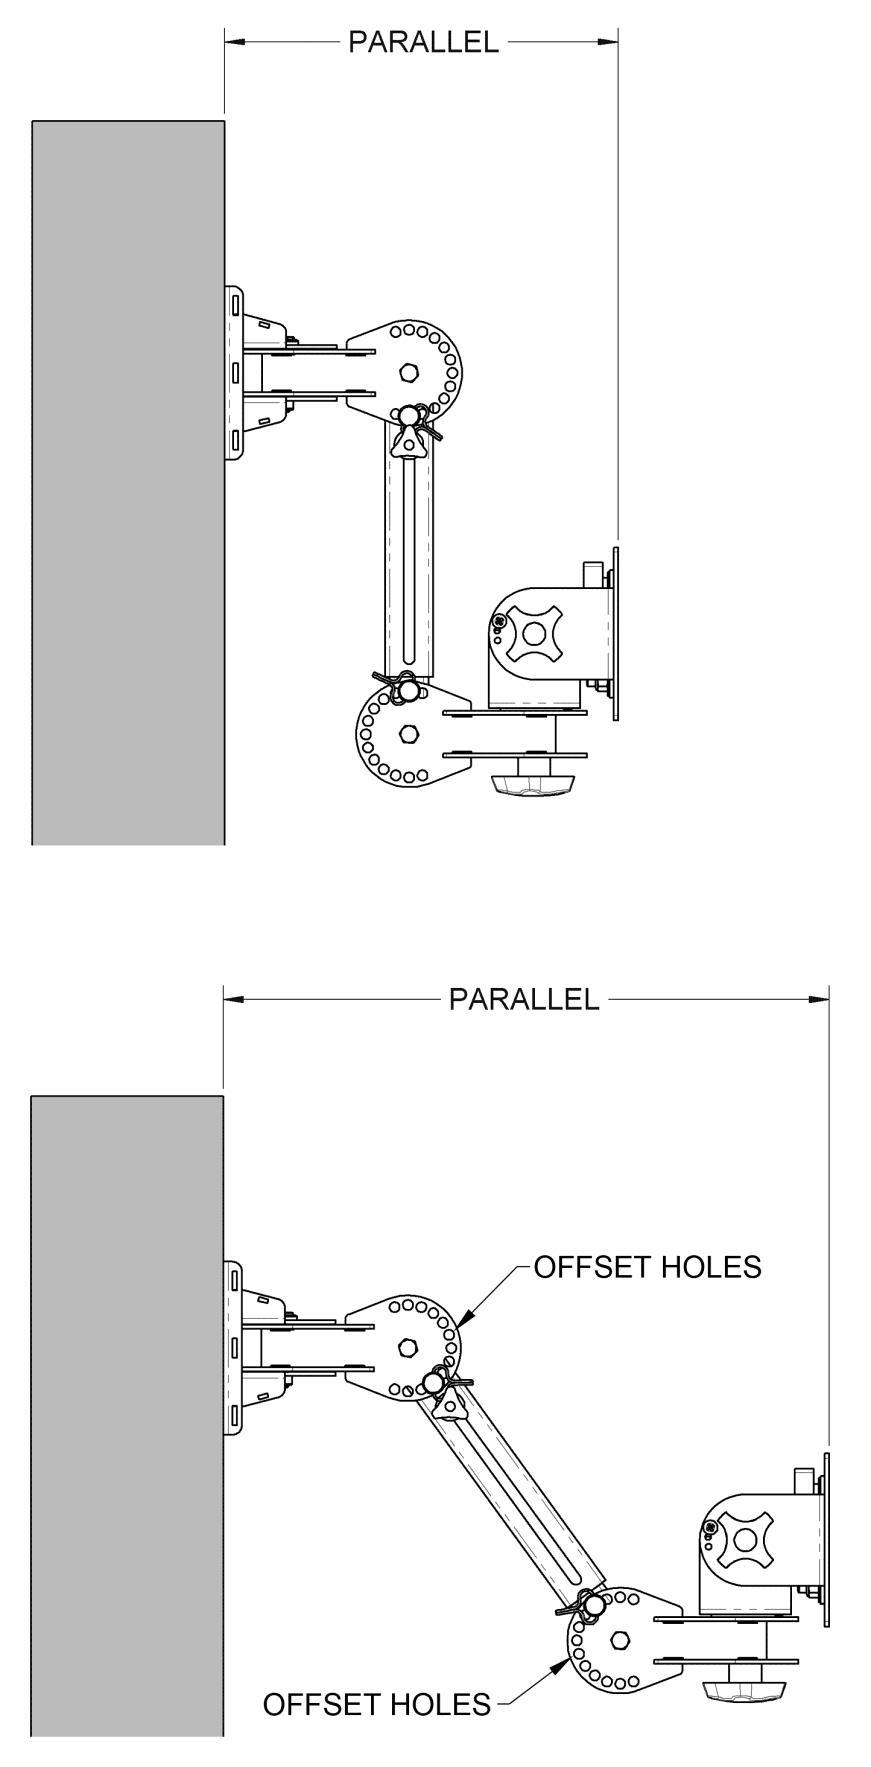 4-of-8 Recommended practice for adjusting the angle of the offset brackets; In most applications you will want the pan and tilt head parallel to the wall or mounting surface.